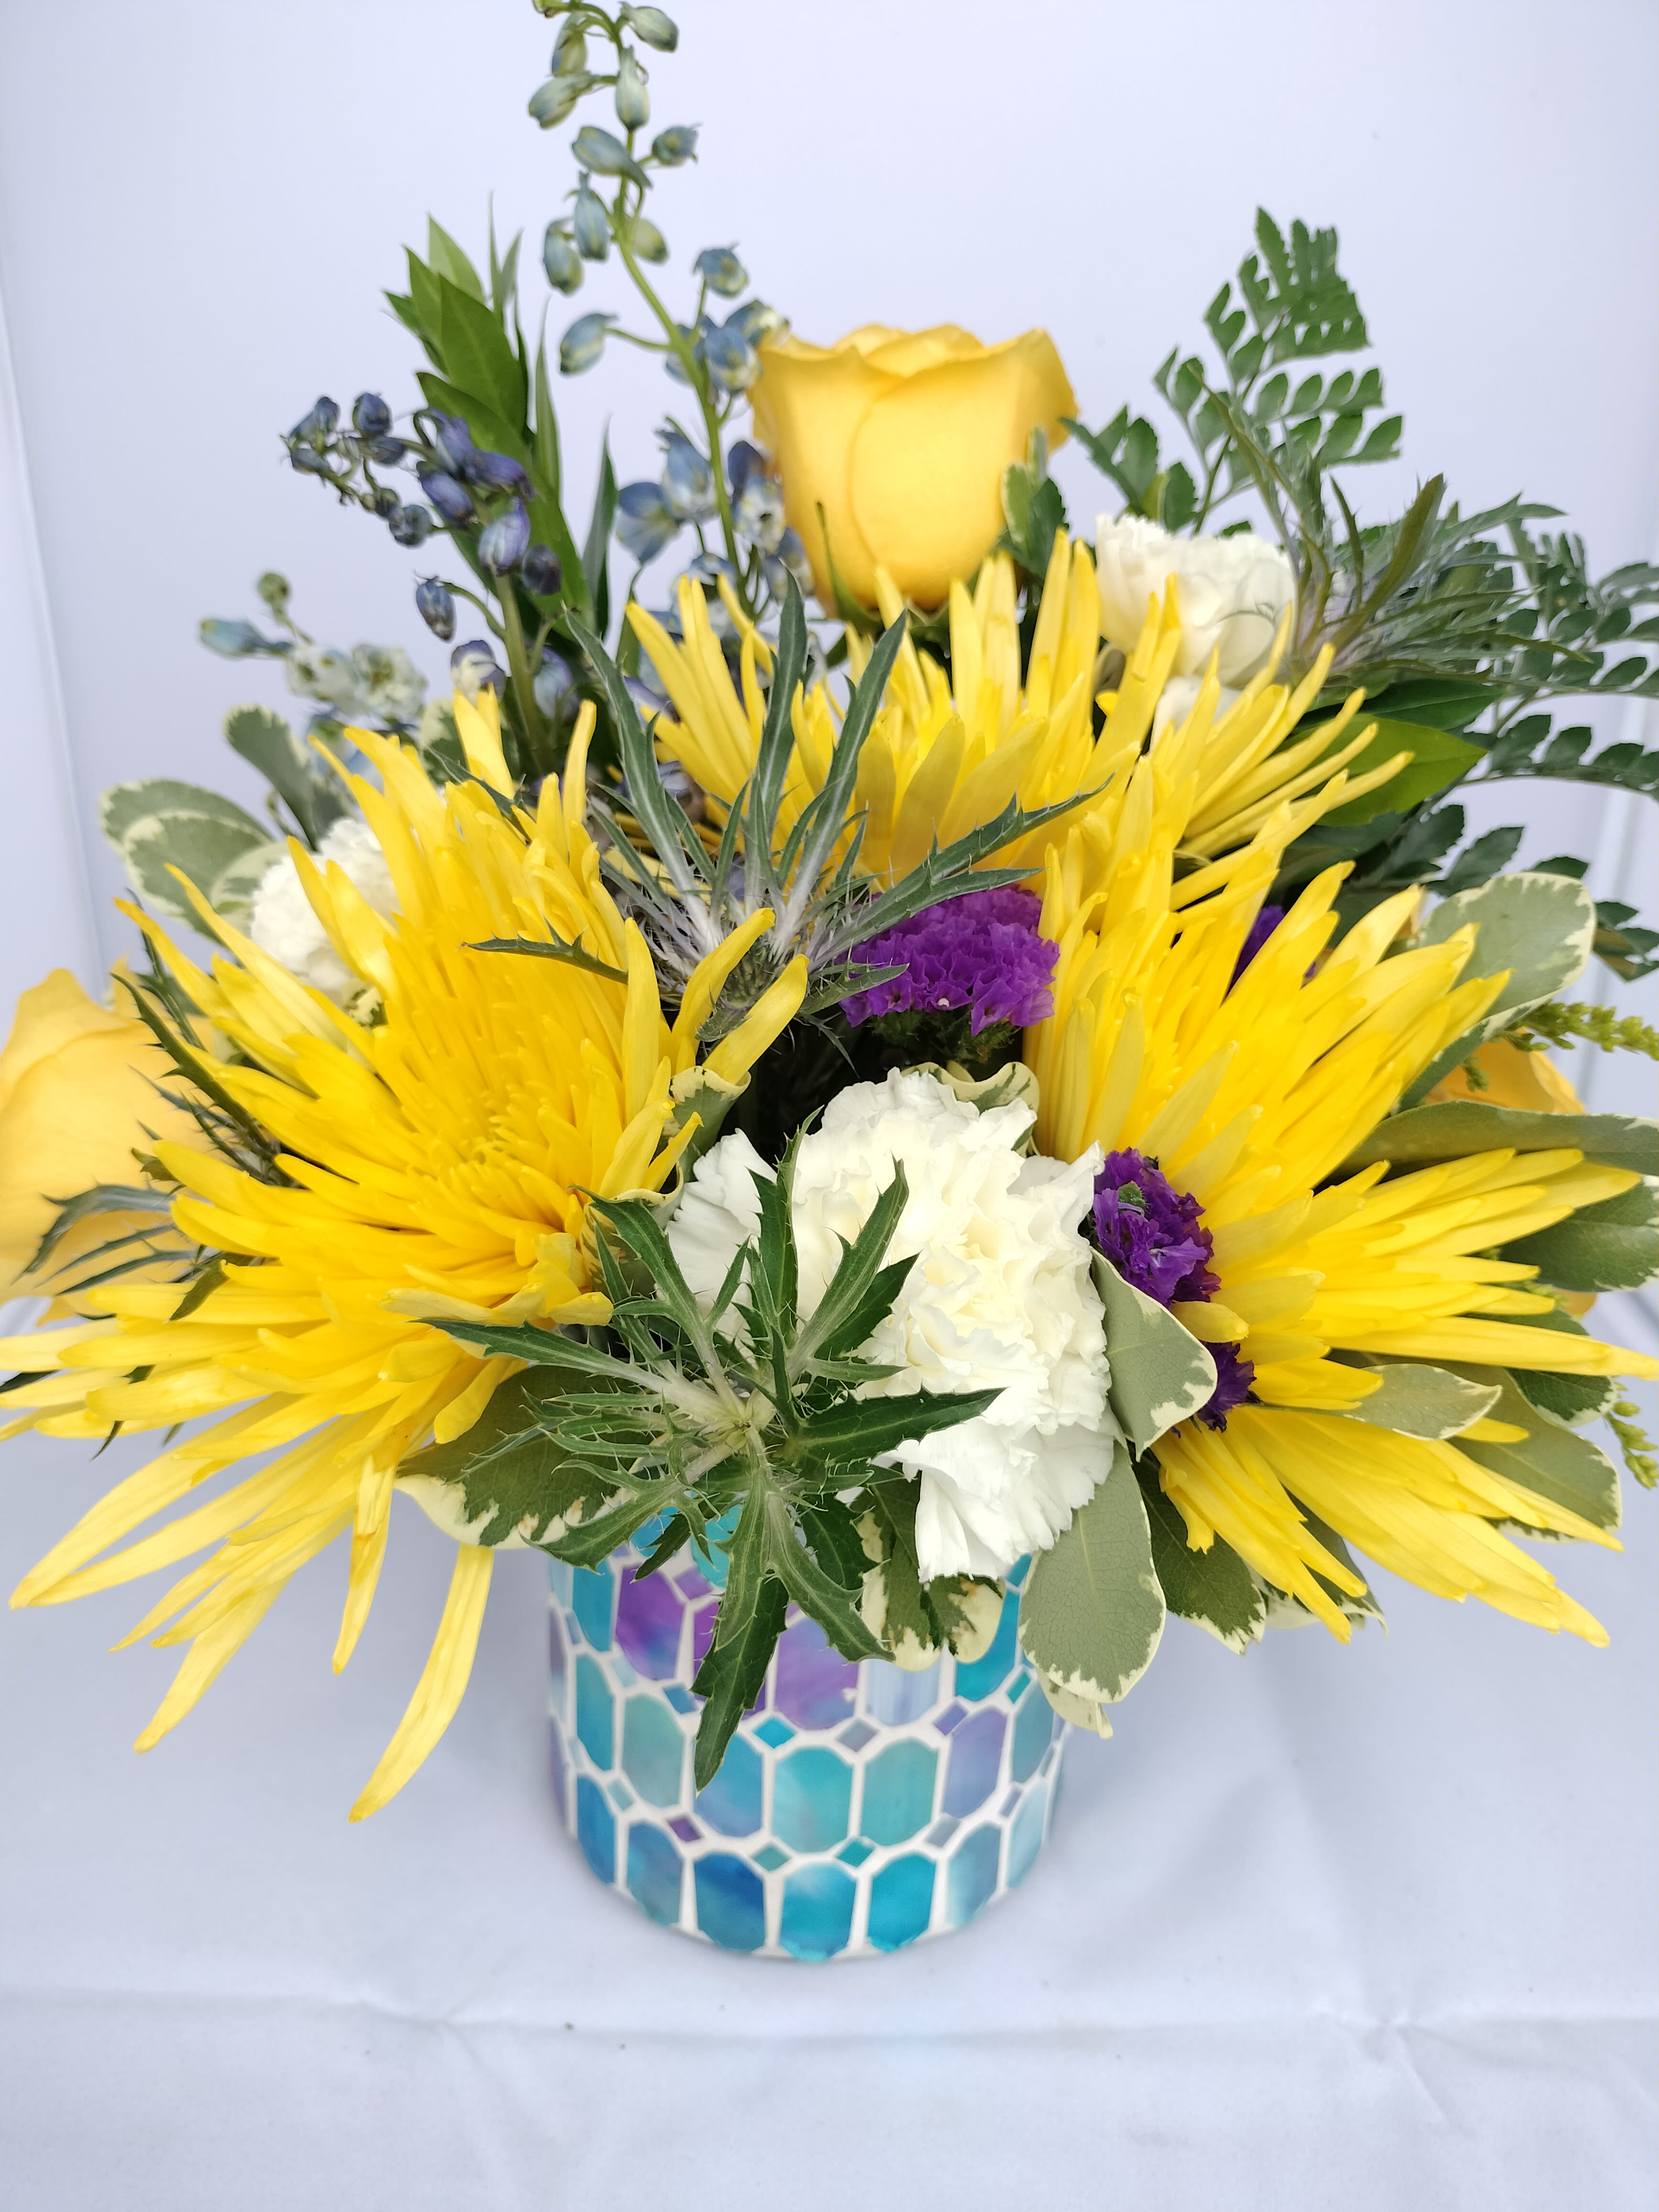 Dreams of the Shore - Dreams of a seaside escape should brighten their day and bring a smile to their face. This blue stained glass mosaic vase filled with blue delphinium, yellow spider mums, blue thistle, yellow roses and accents of purple statice will surely be a hit.